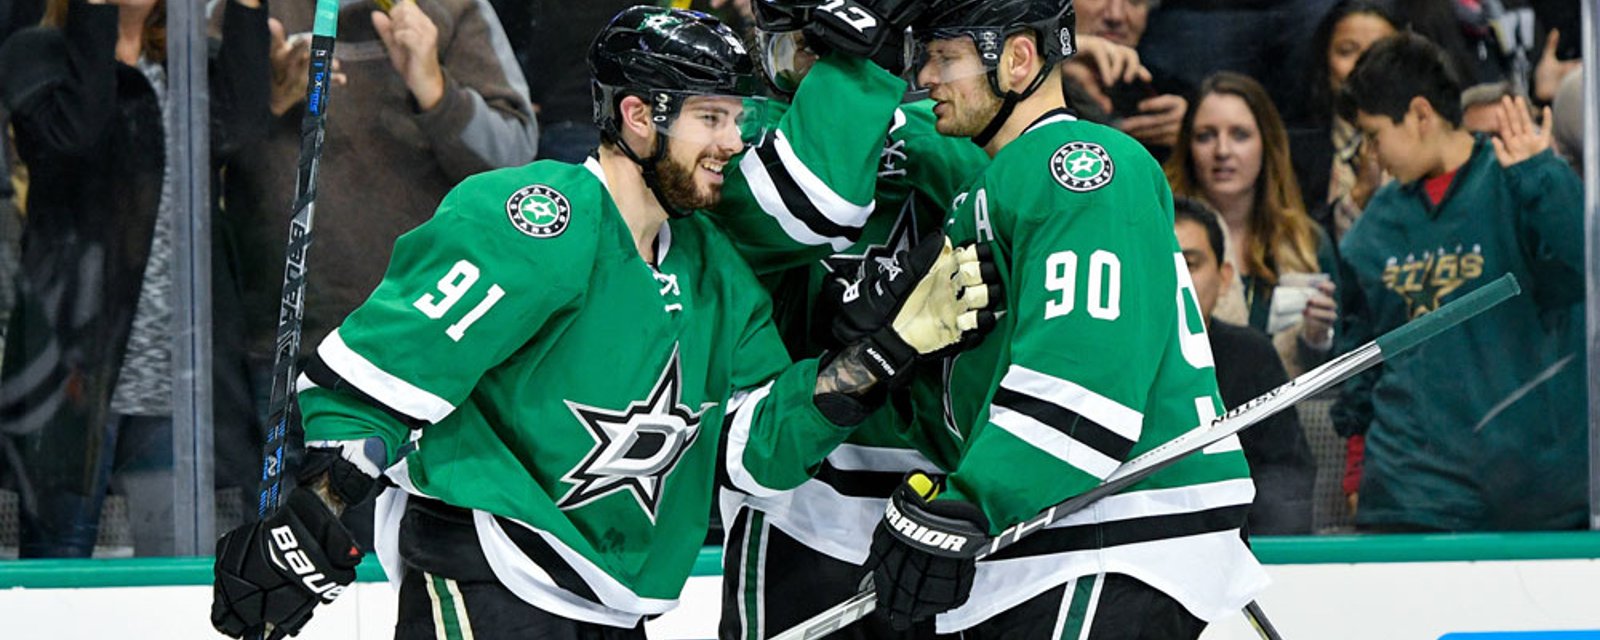 A major sign that now is the time for Spezza to get traded!